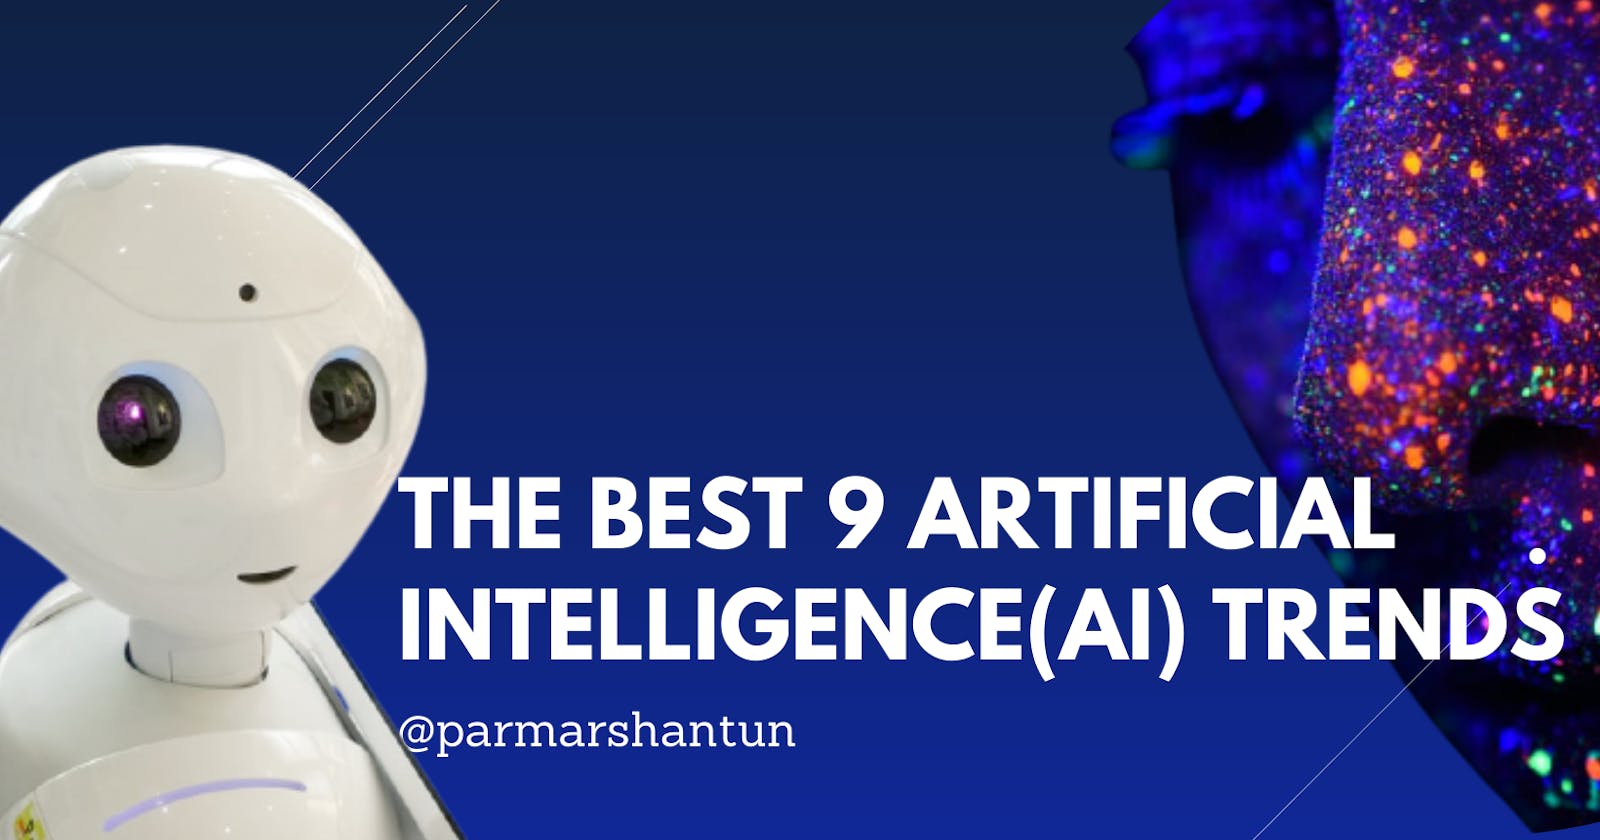 The best 9 Artificial Intelligence(AI) trends